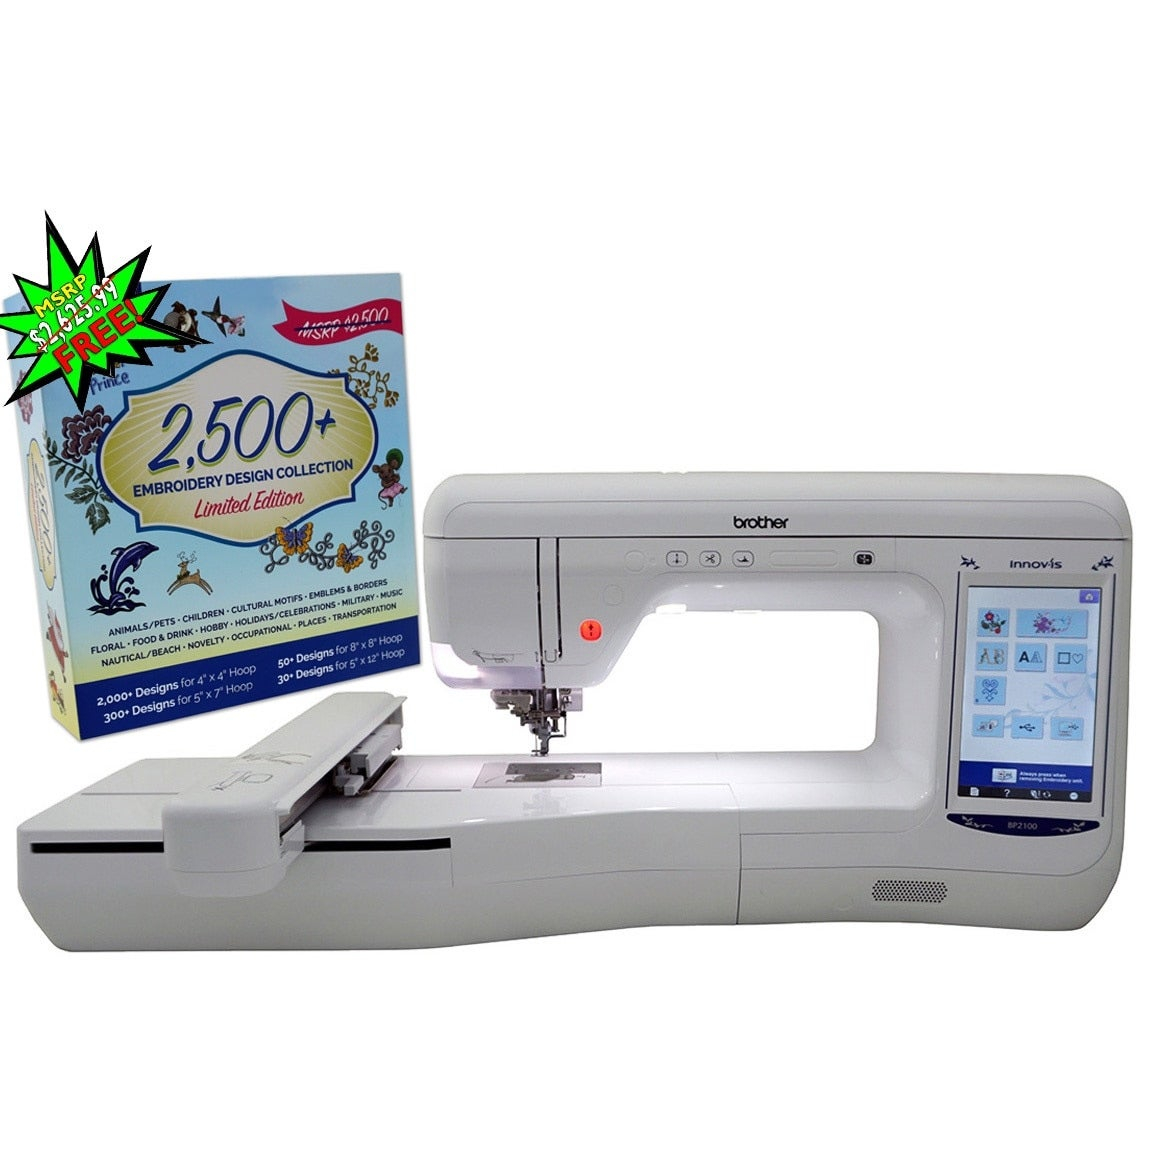 Free Machine Embroidery Patterns Brother Brother Innov Is Bp2100 Embroidery Machine With Bonus 2500 Embroidery Designs Cd